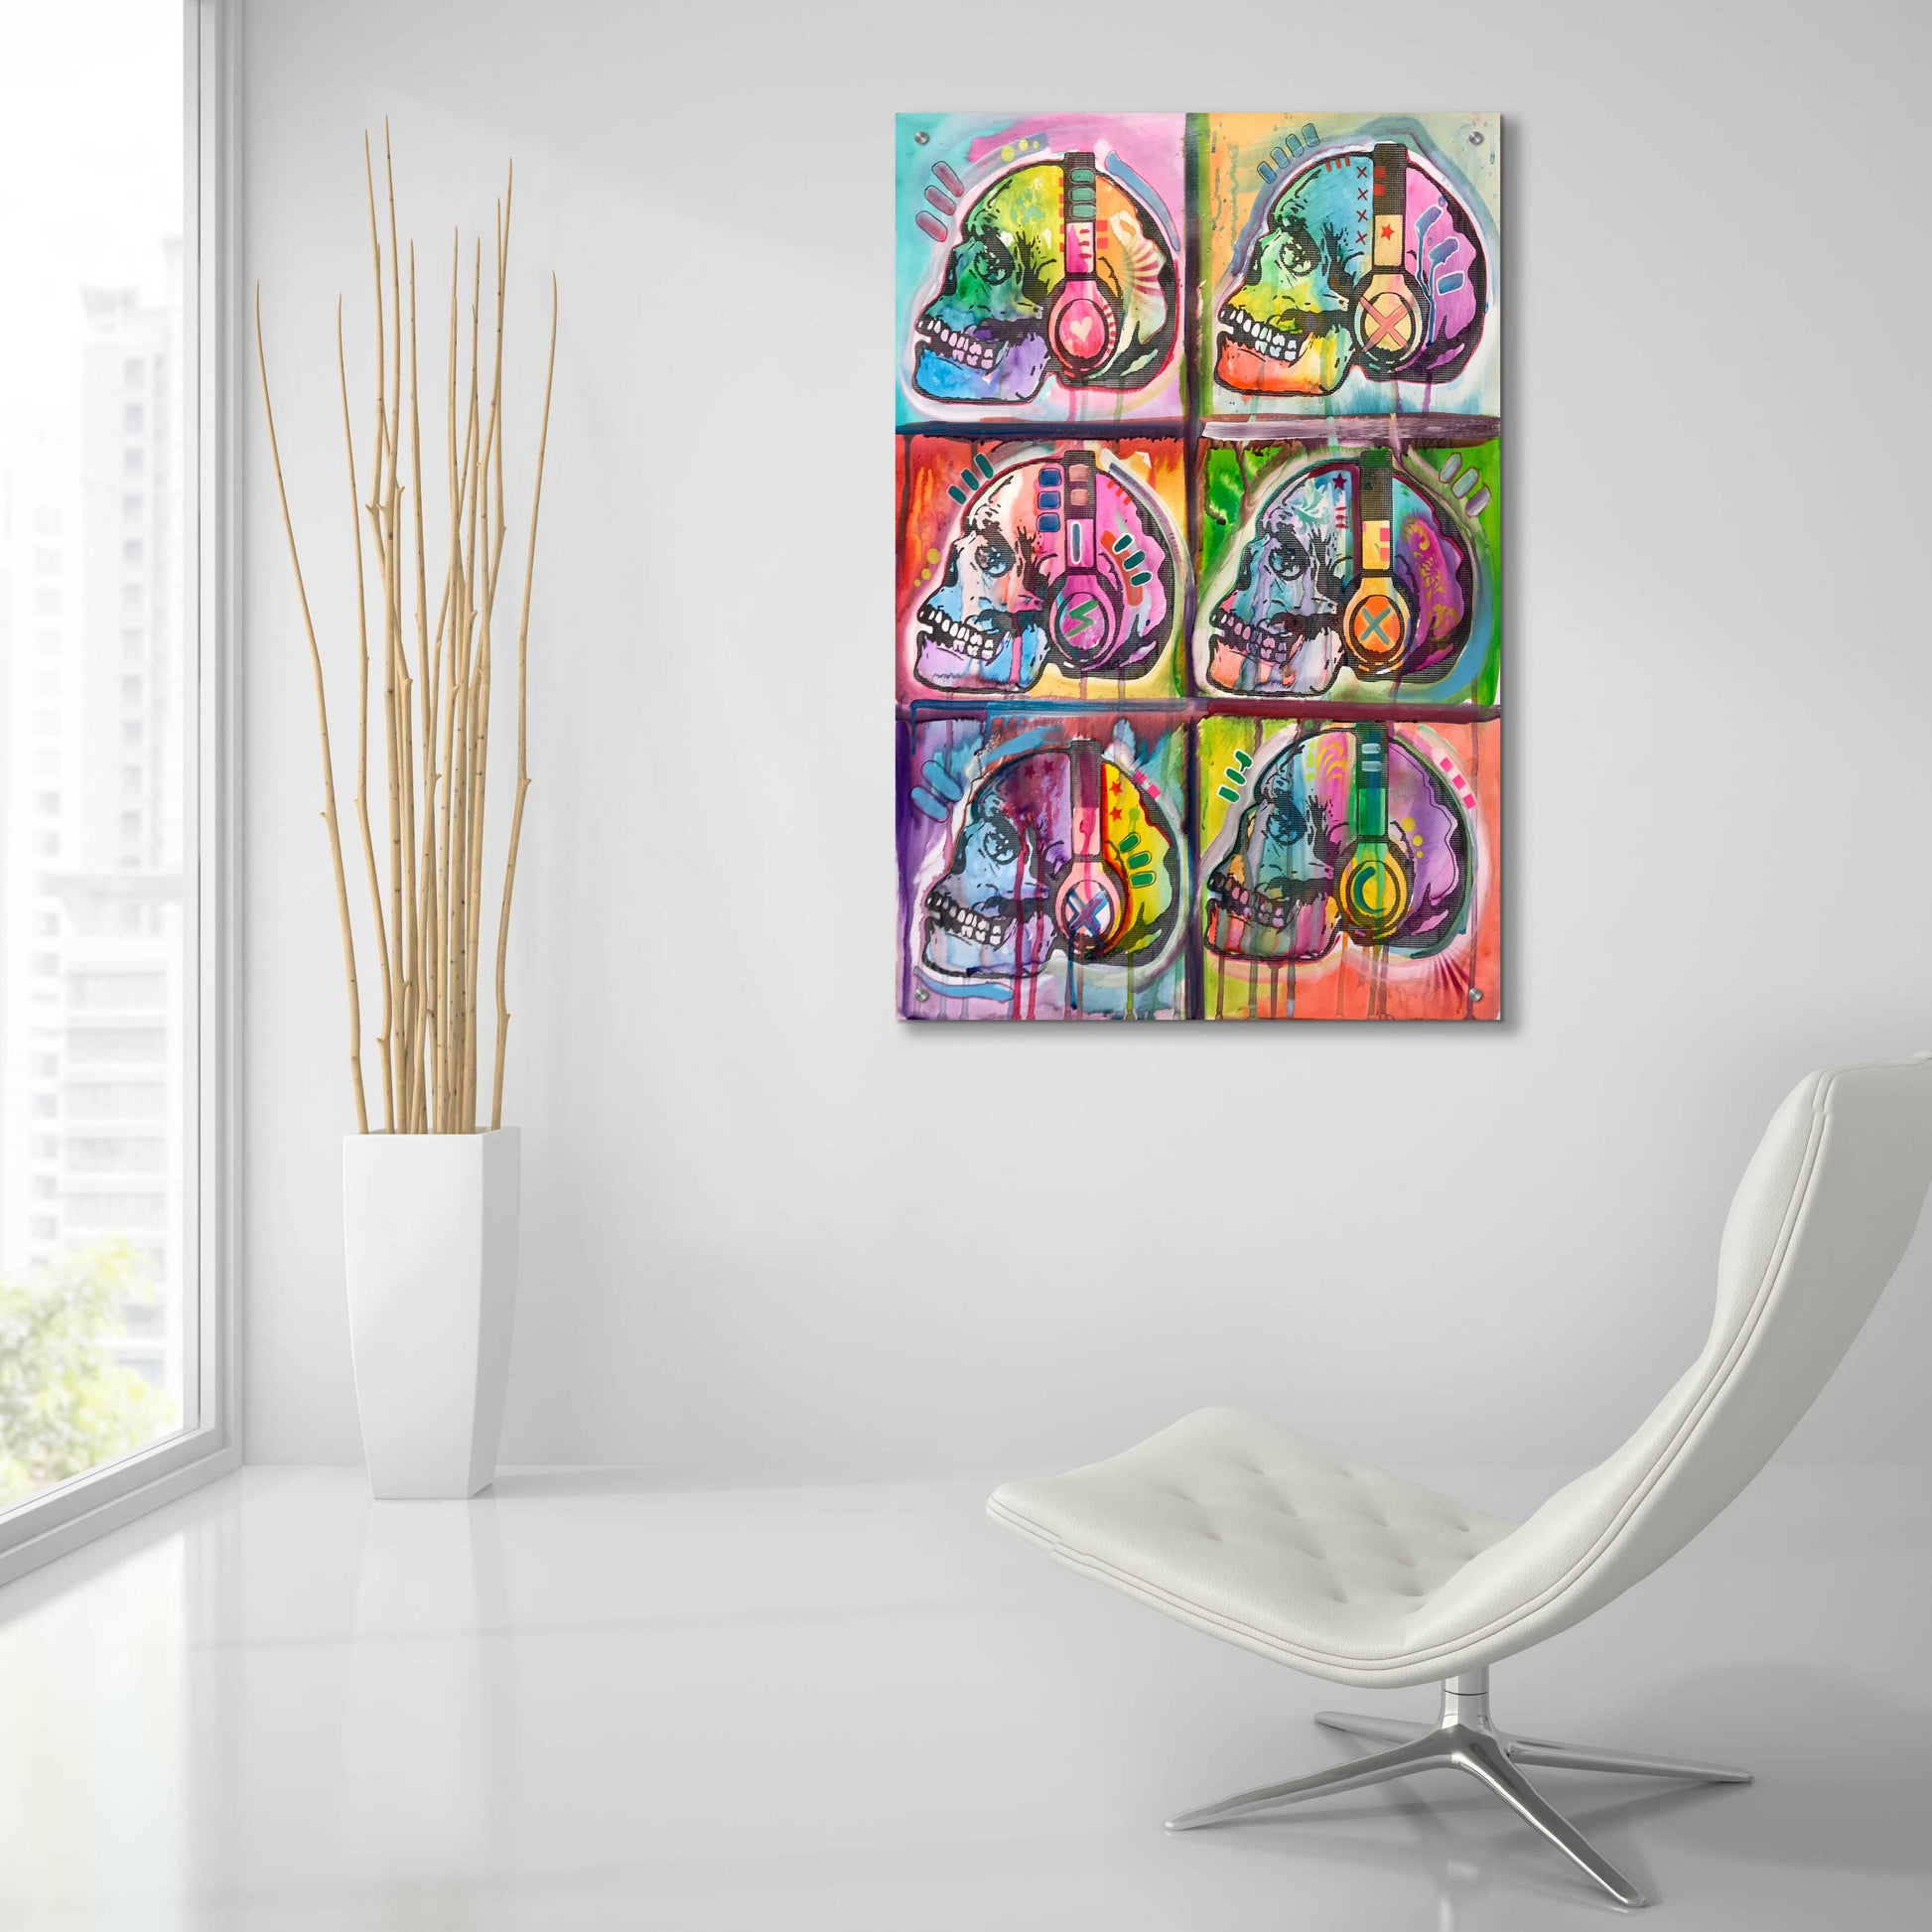 Epic Art 'Live Music 6UP' by Dean Russo, Acrylic Glass Wall Art,24x36